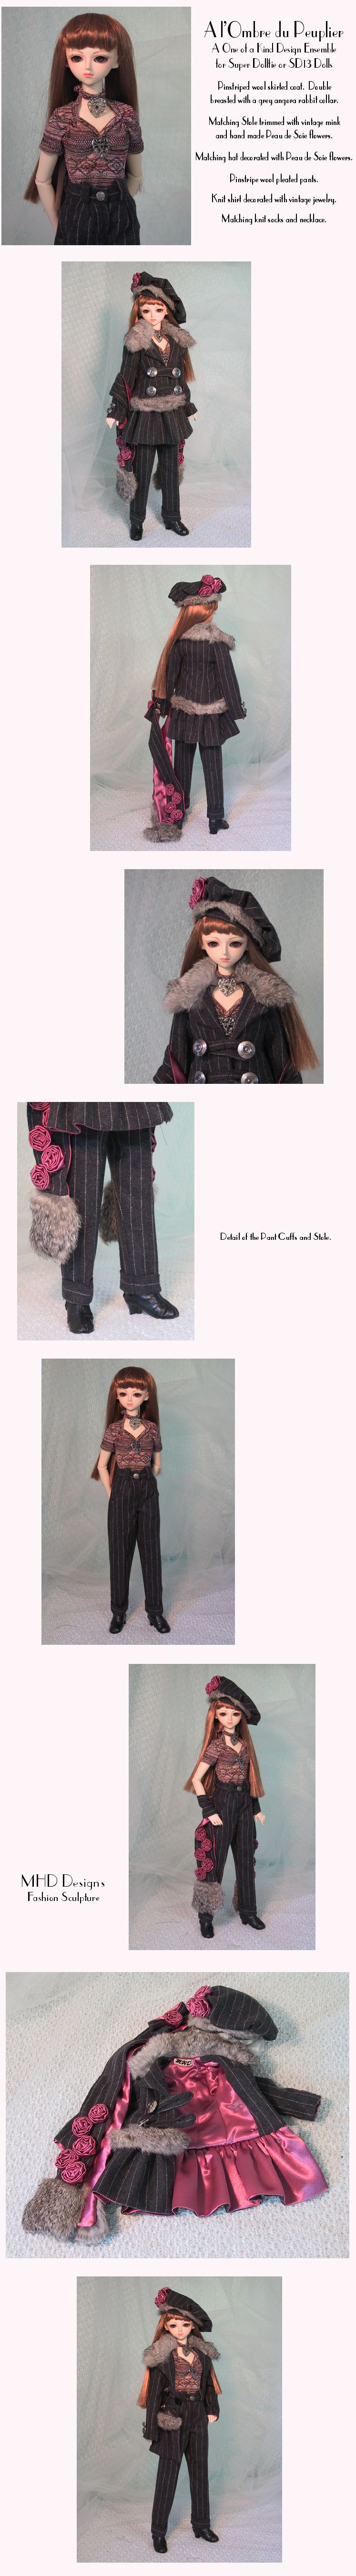 MHD Designs - In The Shade of the Elm Tree - for Super Dollfie and SD13 Dolls